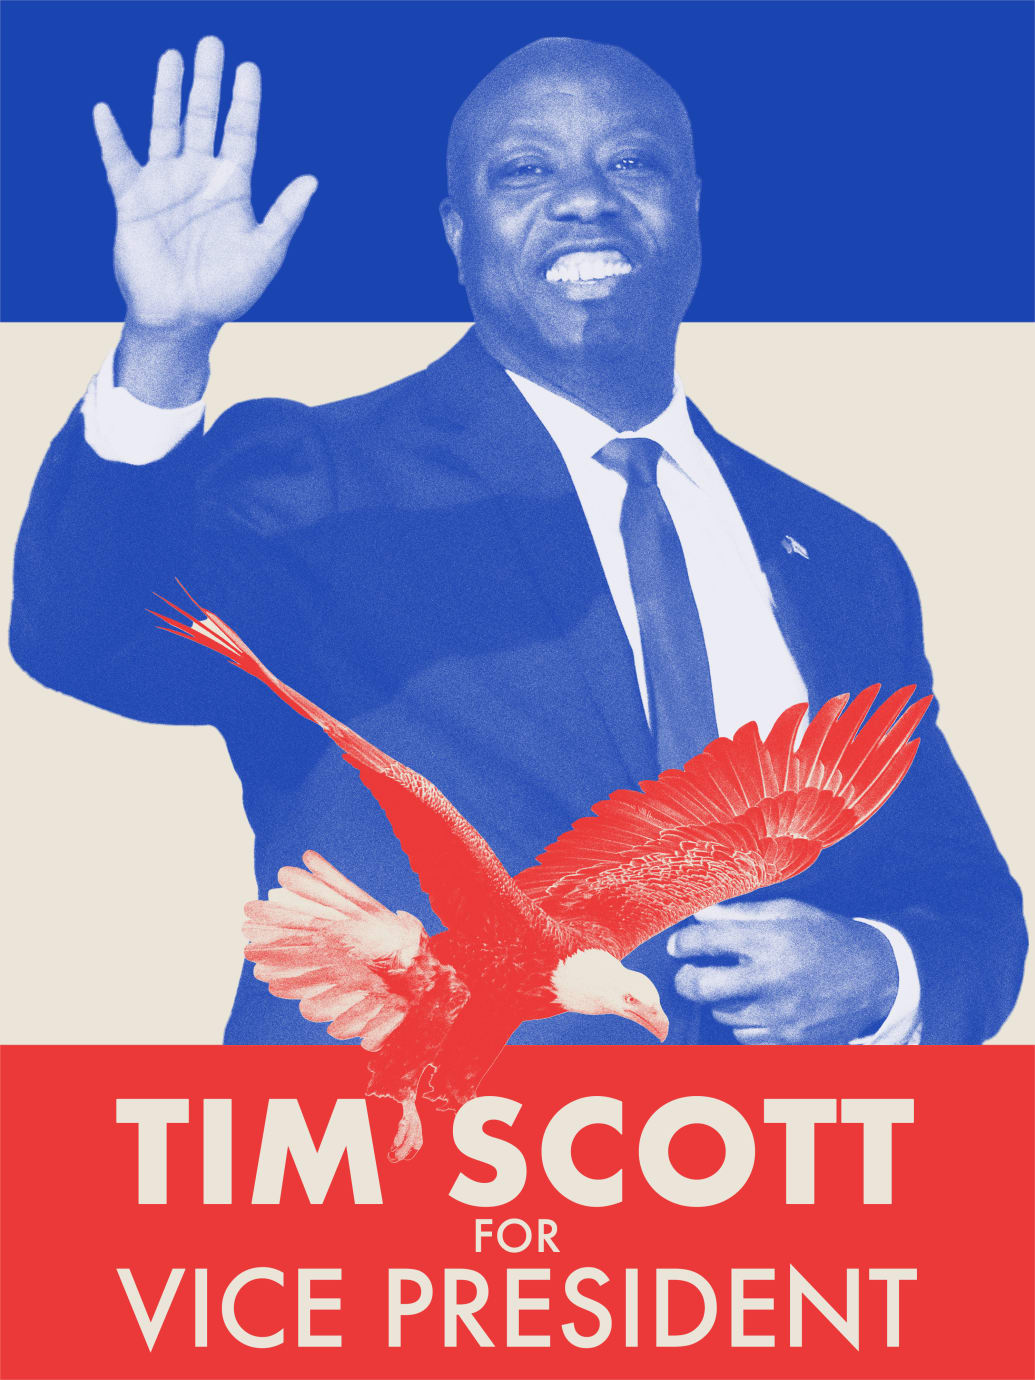 Vice Presidential campaign poster featuring Tim Scott